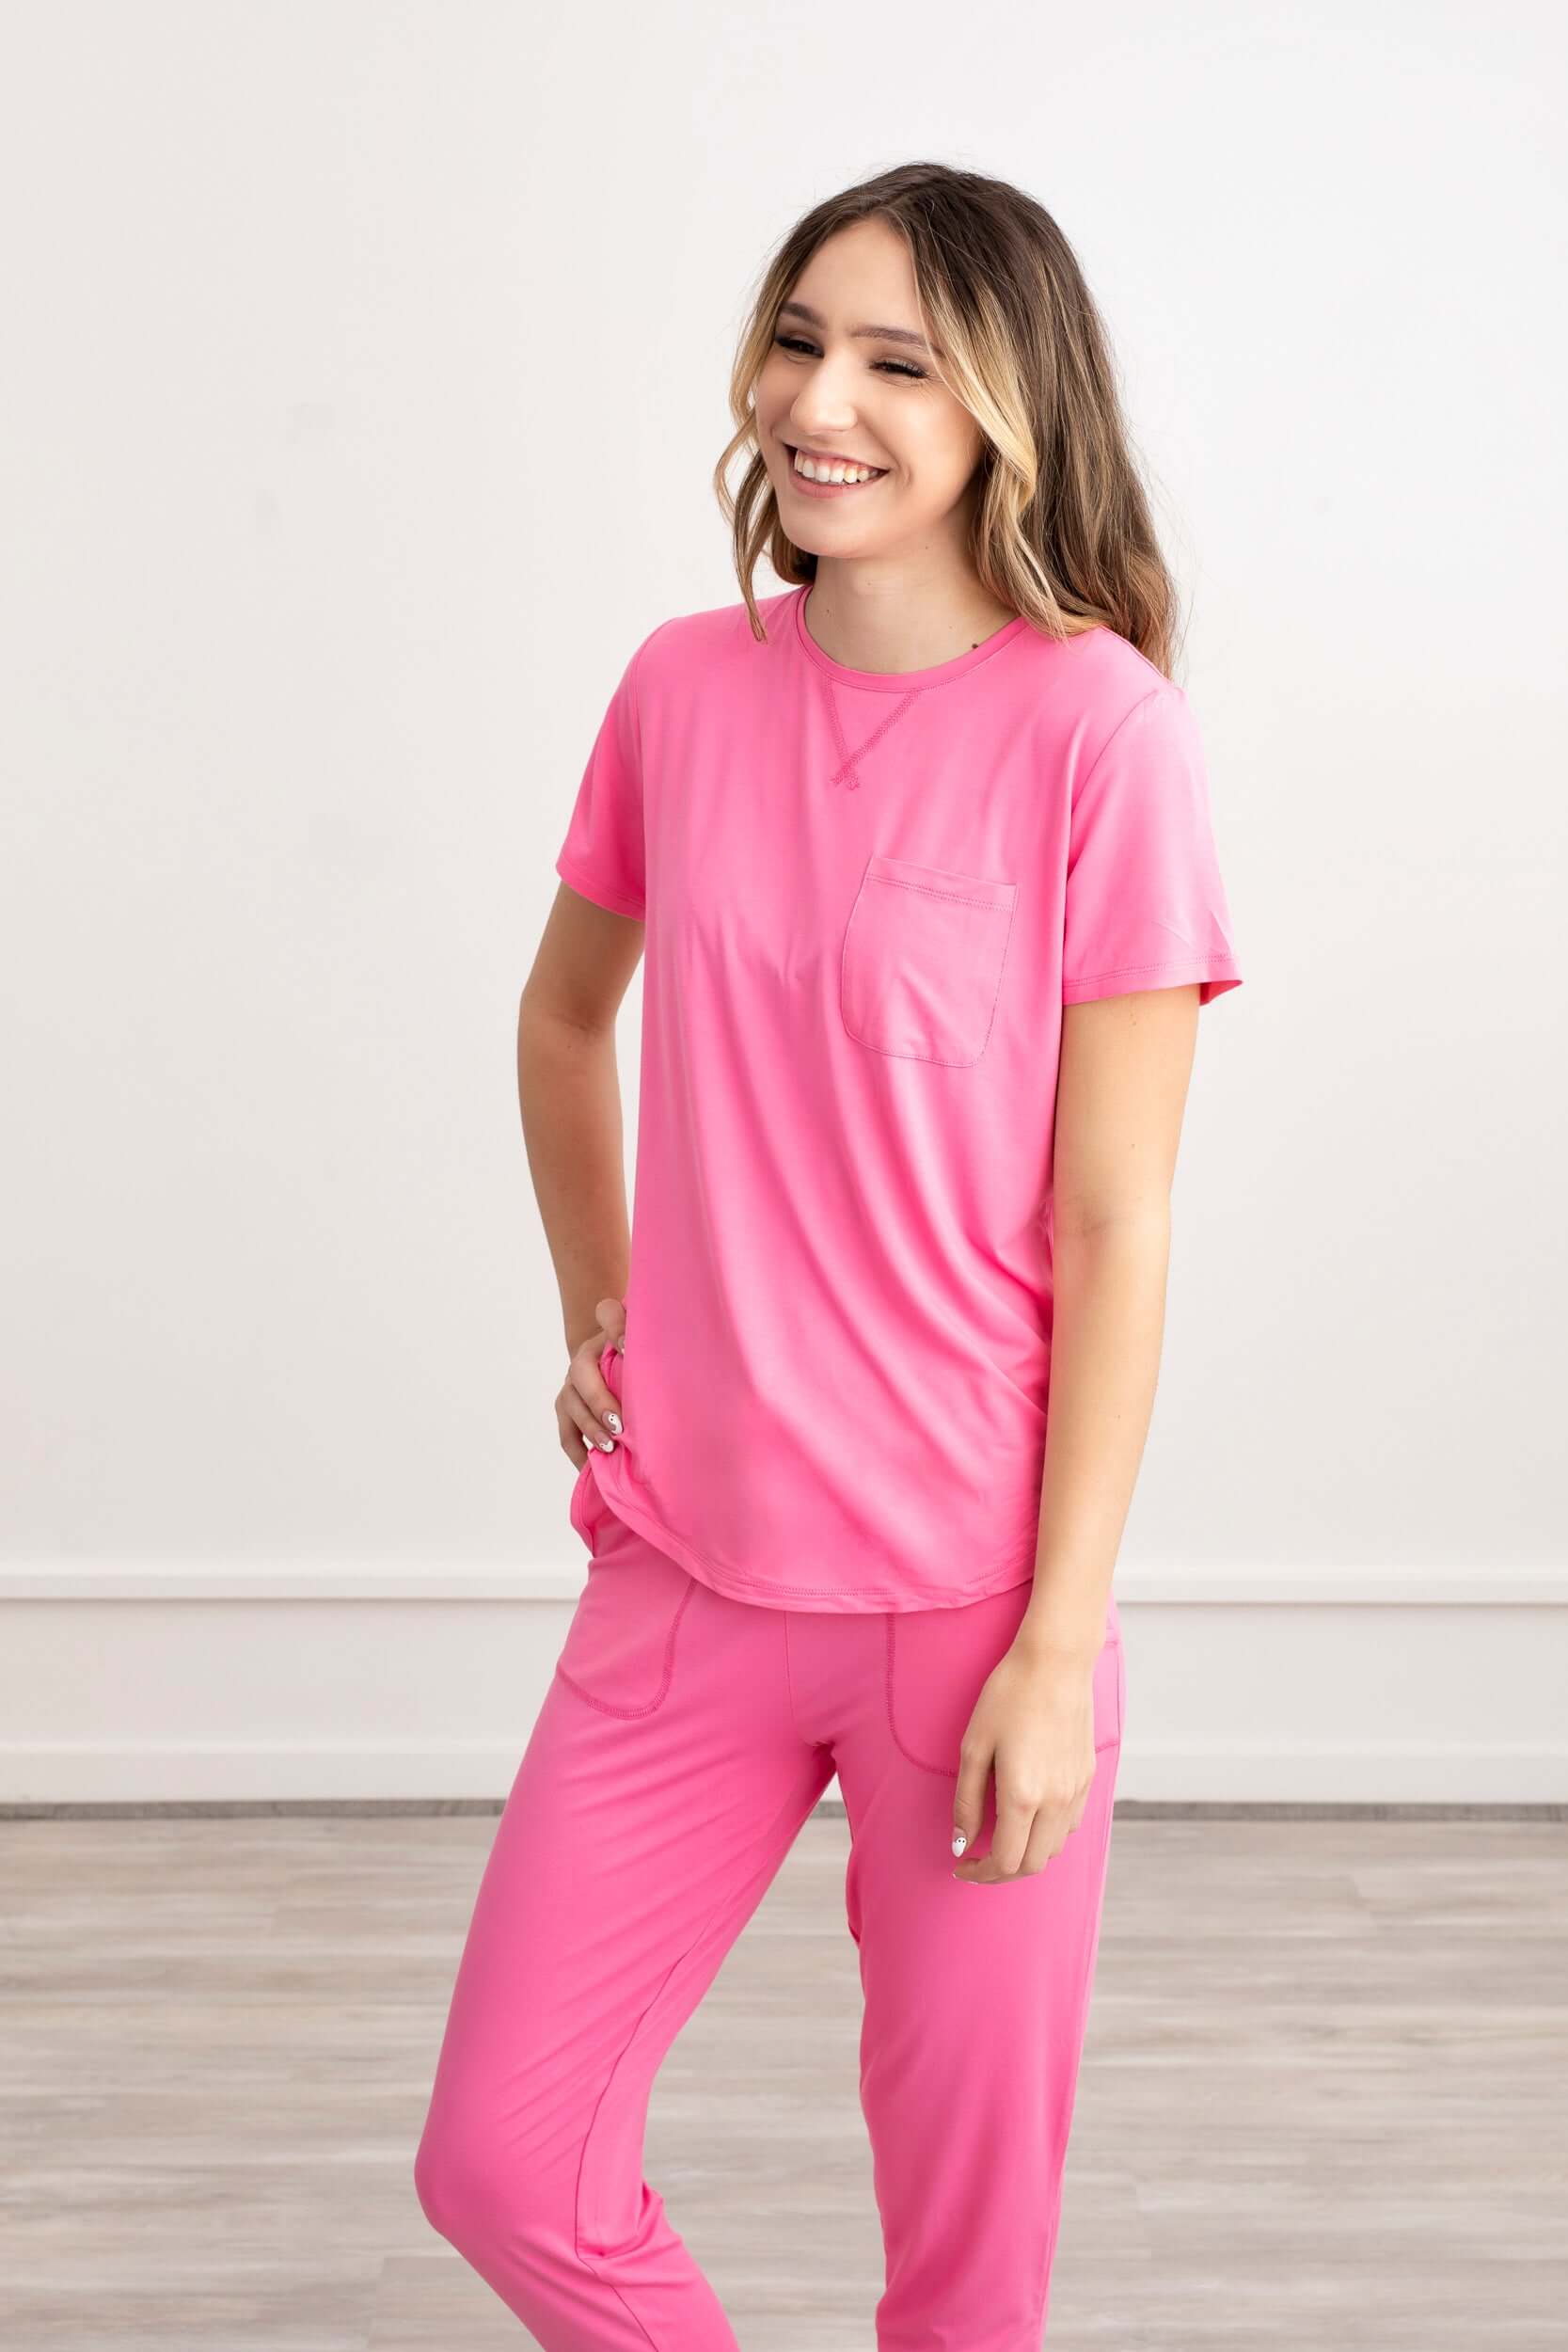 Chic and comfy, our Pink Rose Bamboo Pajama Set is showcased by a graceful girl. The soft, sustainable fabric and rosy hue create a perfect blend of style and coziness, inviting you to embrace serene moments in eco-friendly fashion."